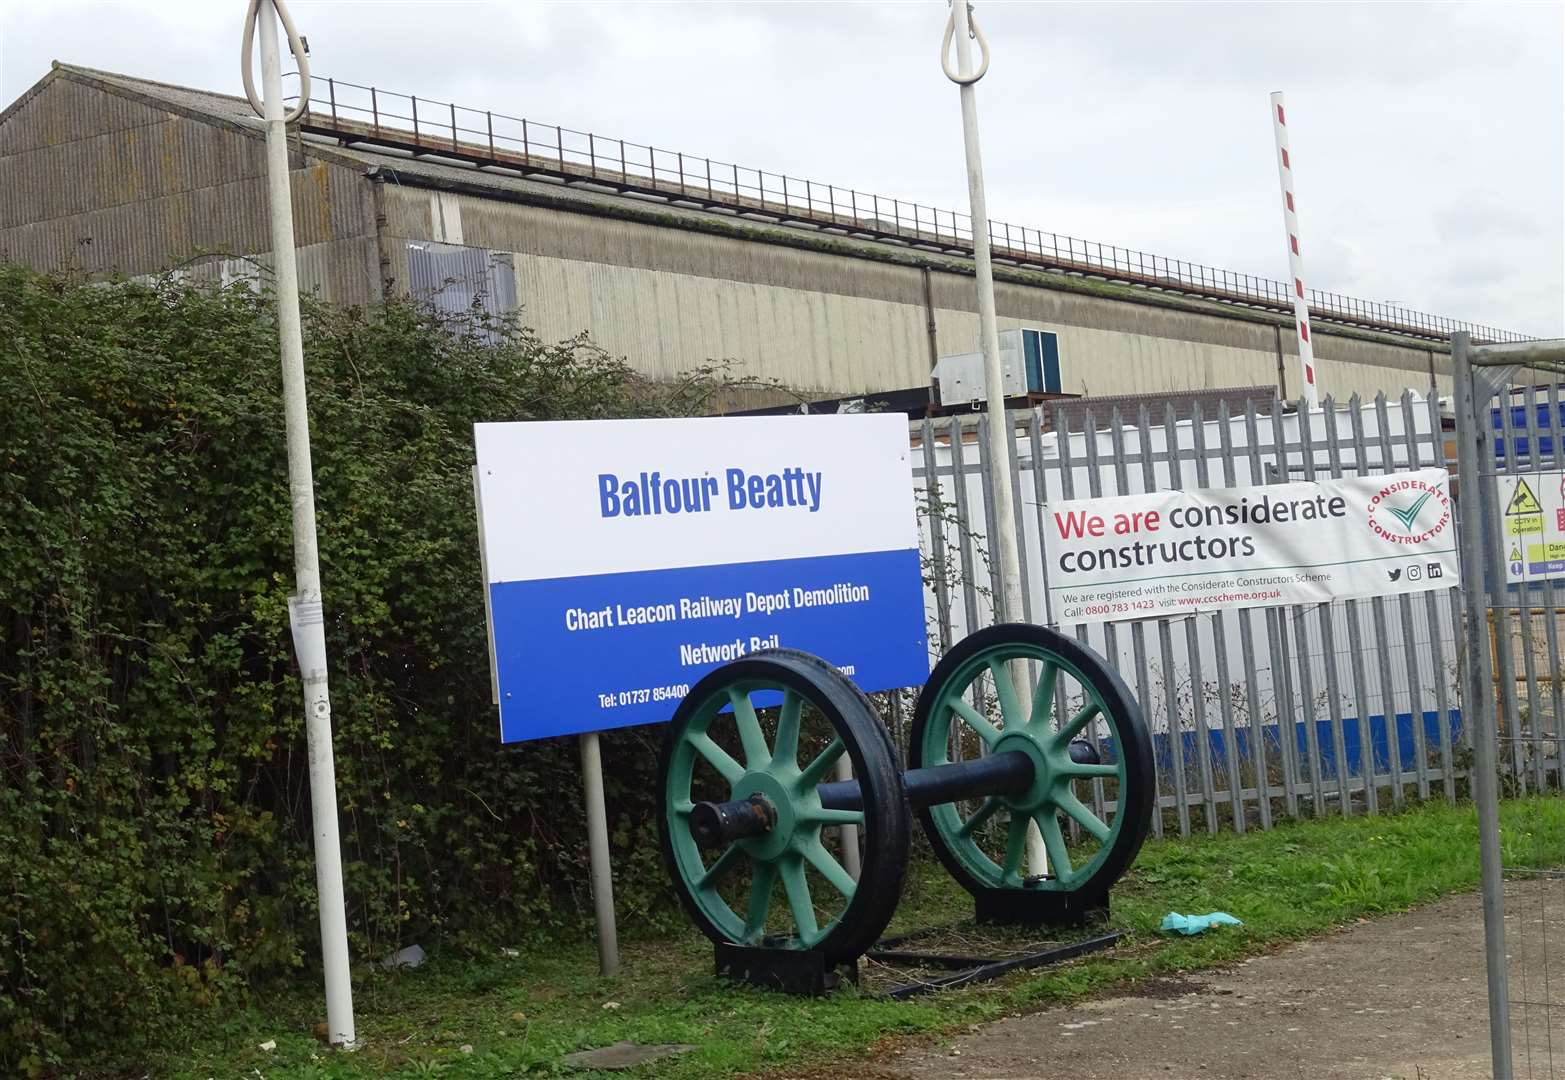 A new Balfour Beatty sign has been erected at the front of the depot